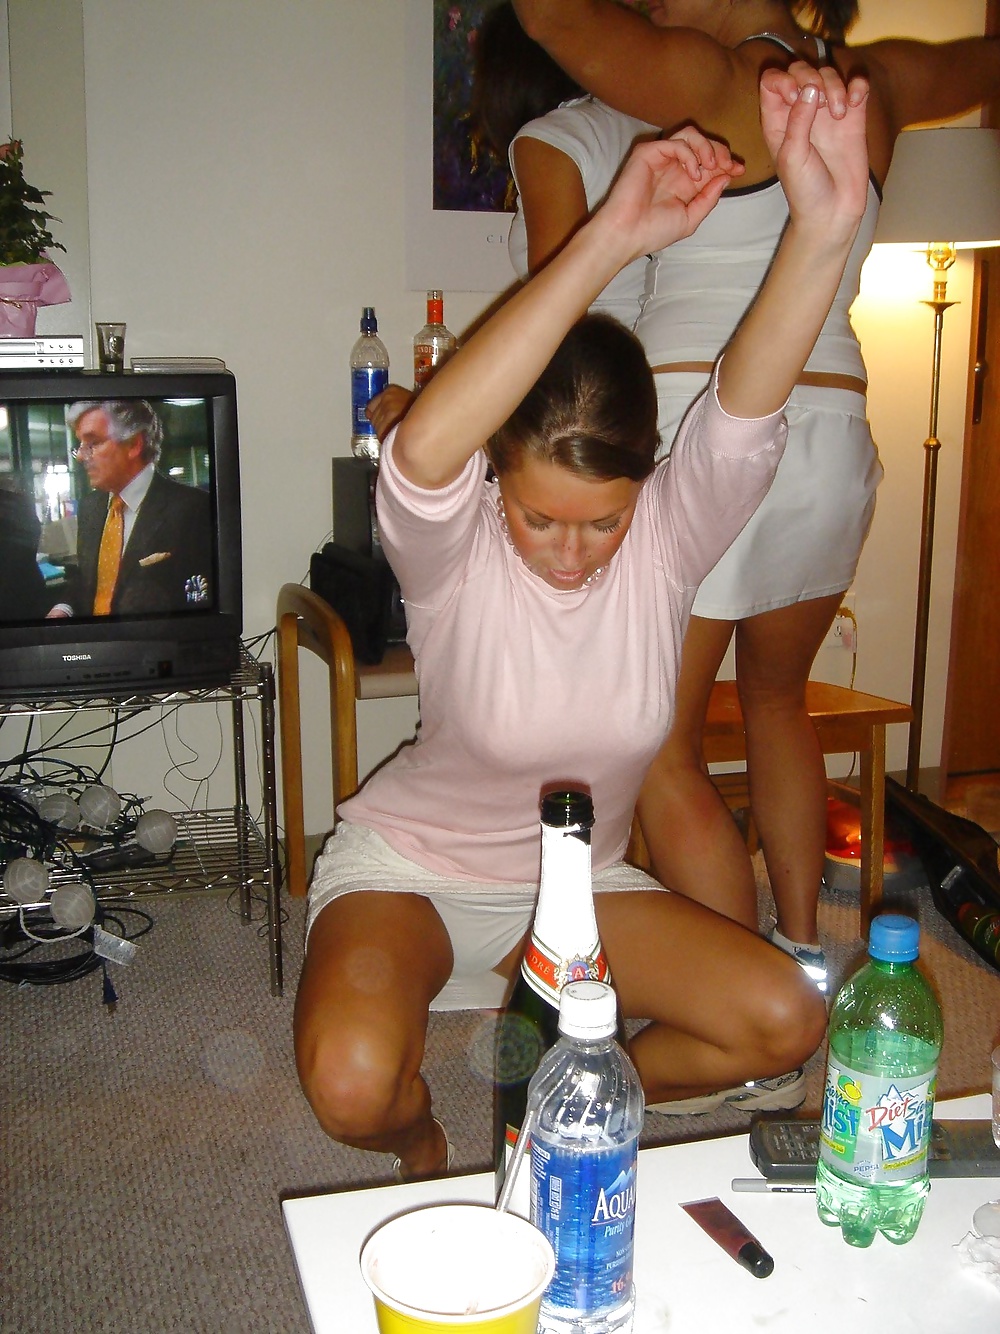 Upskirt, Flashing, candid images from girls and matures #28040121